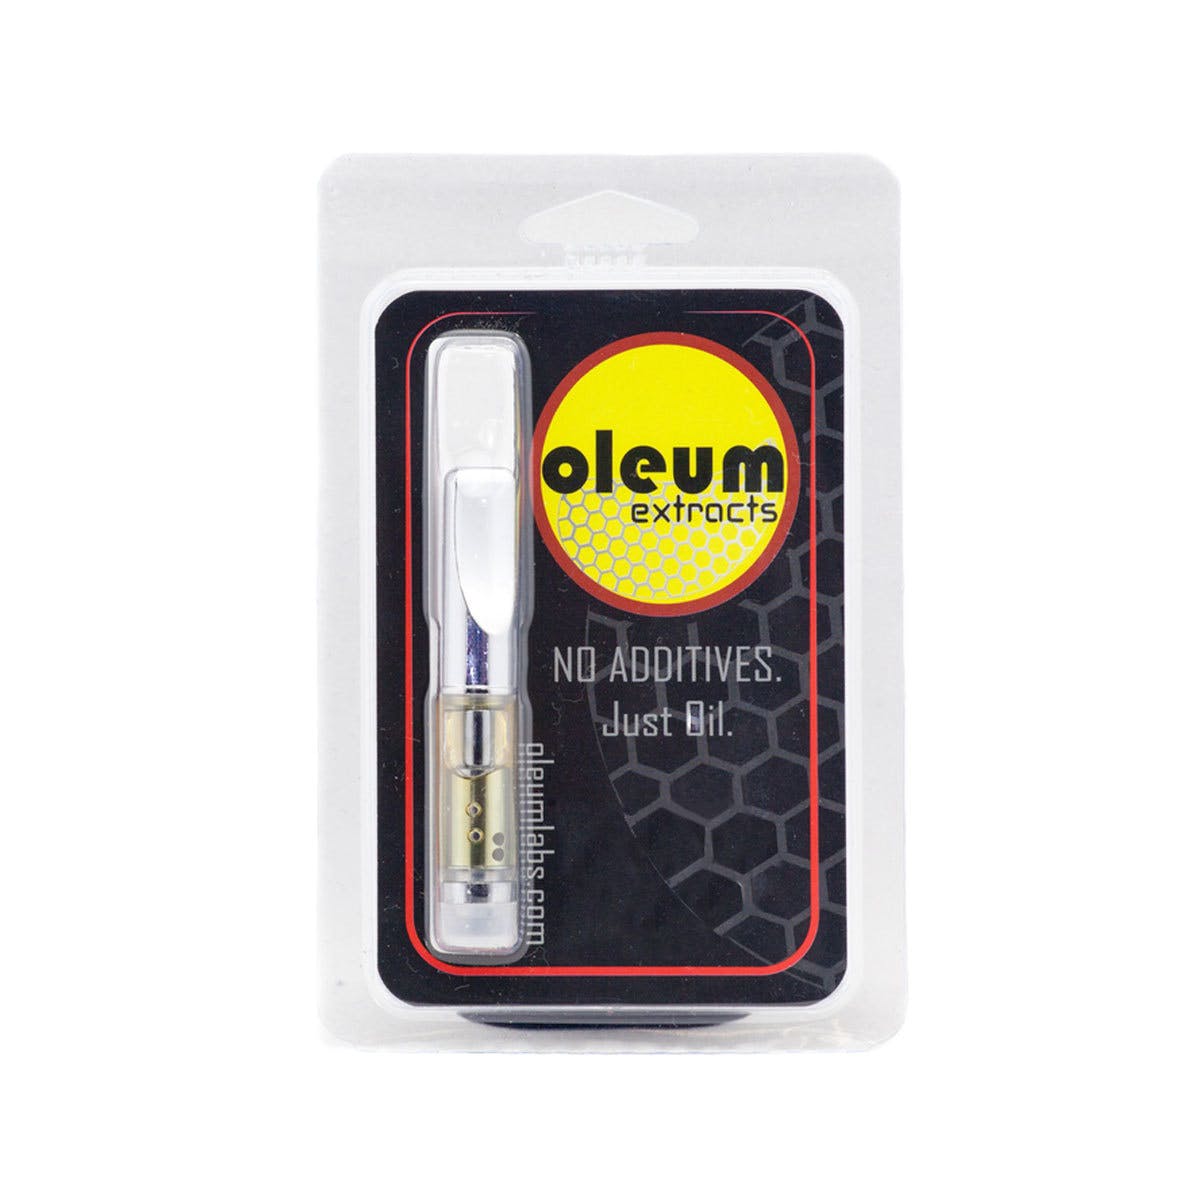 concentrate-oleum-extracts-chernobyl-distillate-cartridge